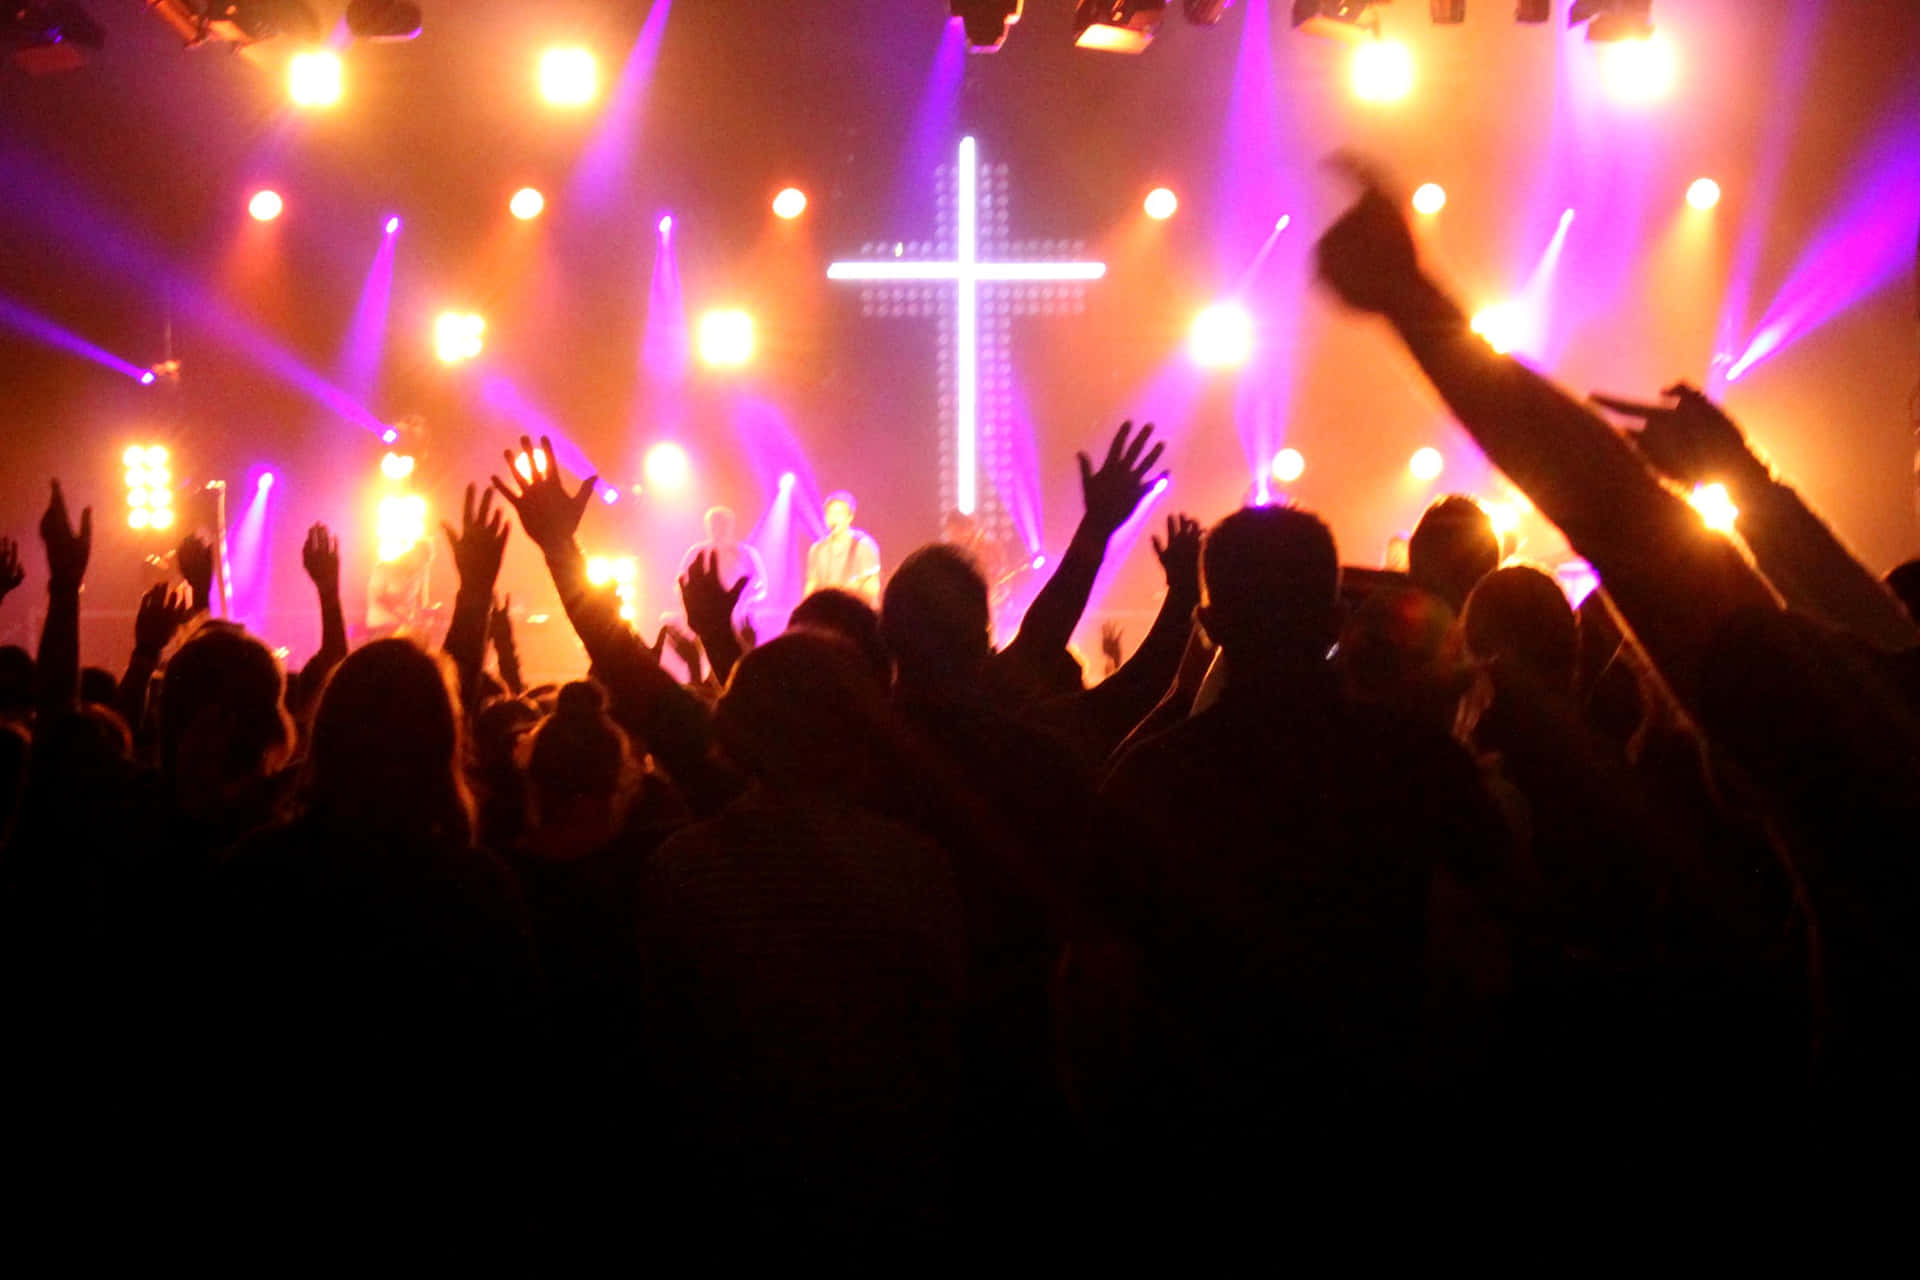 Christian Band With Cross Concert Background